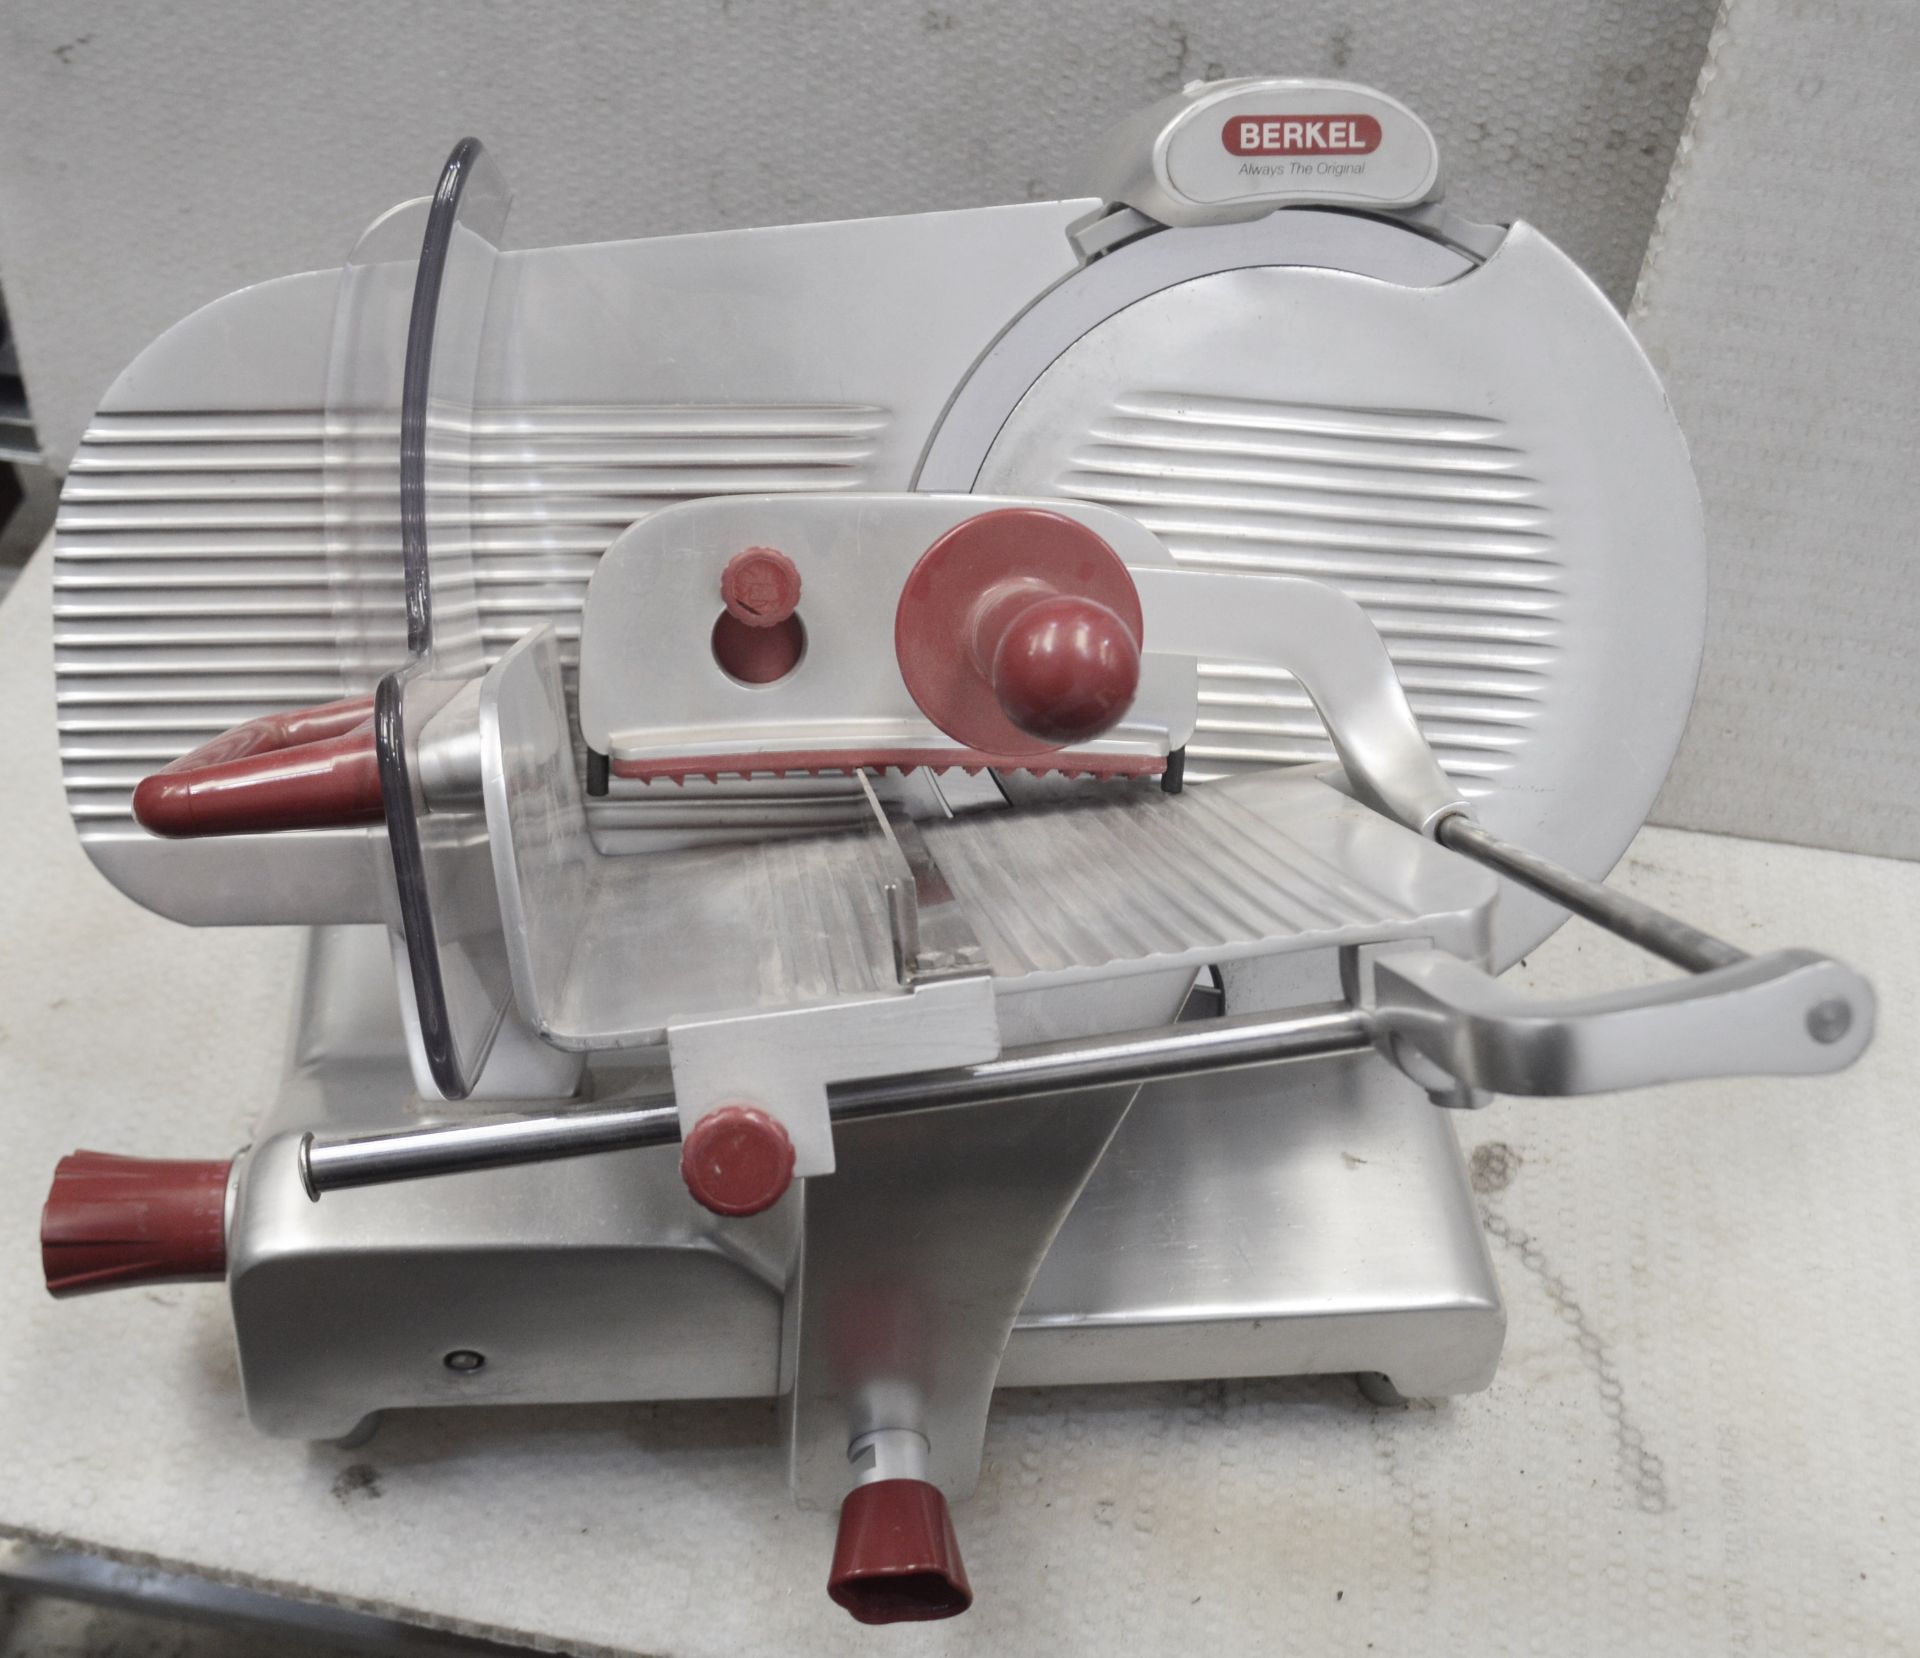 1 x Berkel 12" Commercial Cooked Meat / Bacon Slicer - 220-240v - Model BSPGL04011A0F - Image 2 of 4